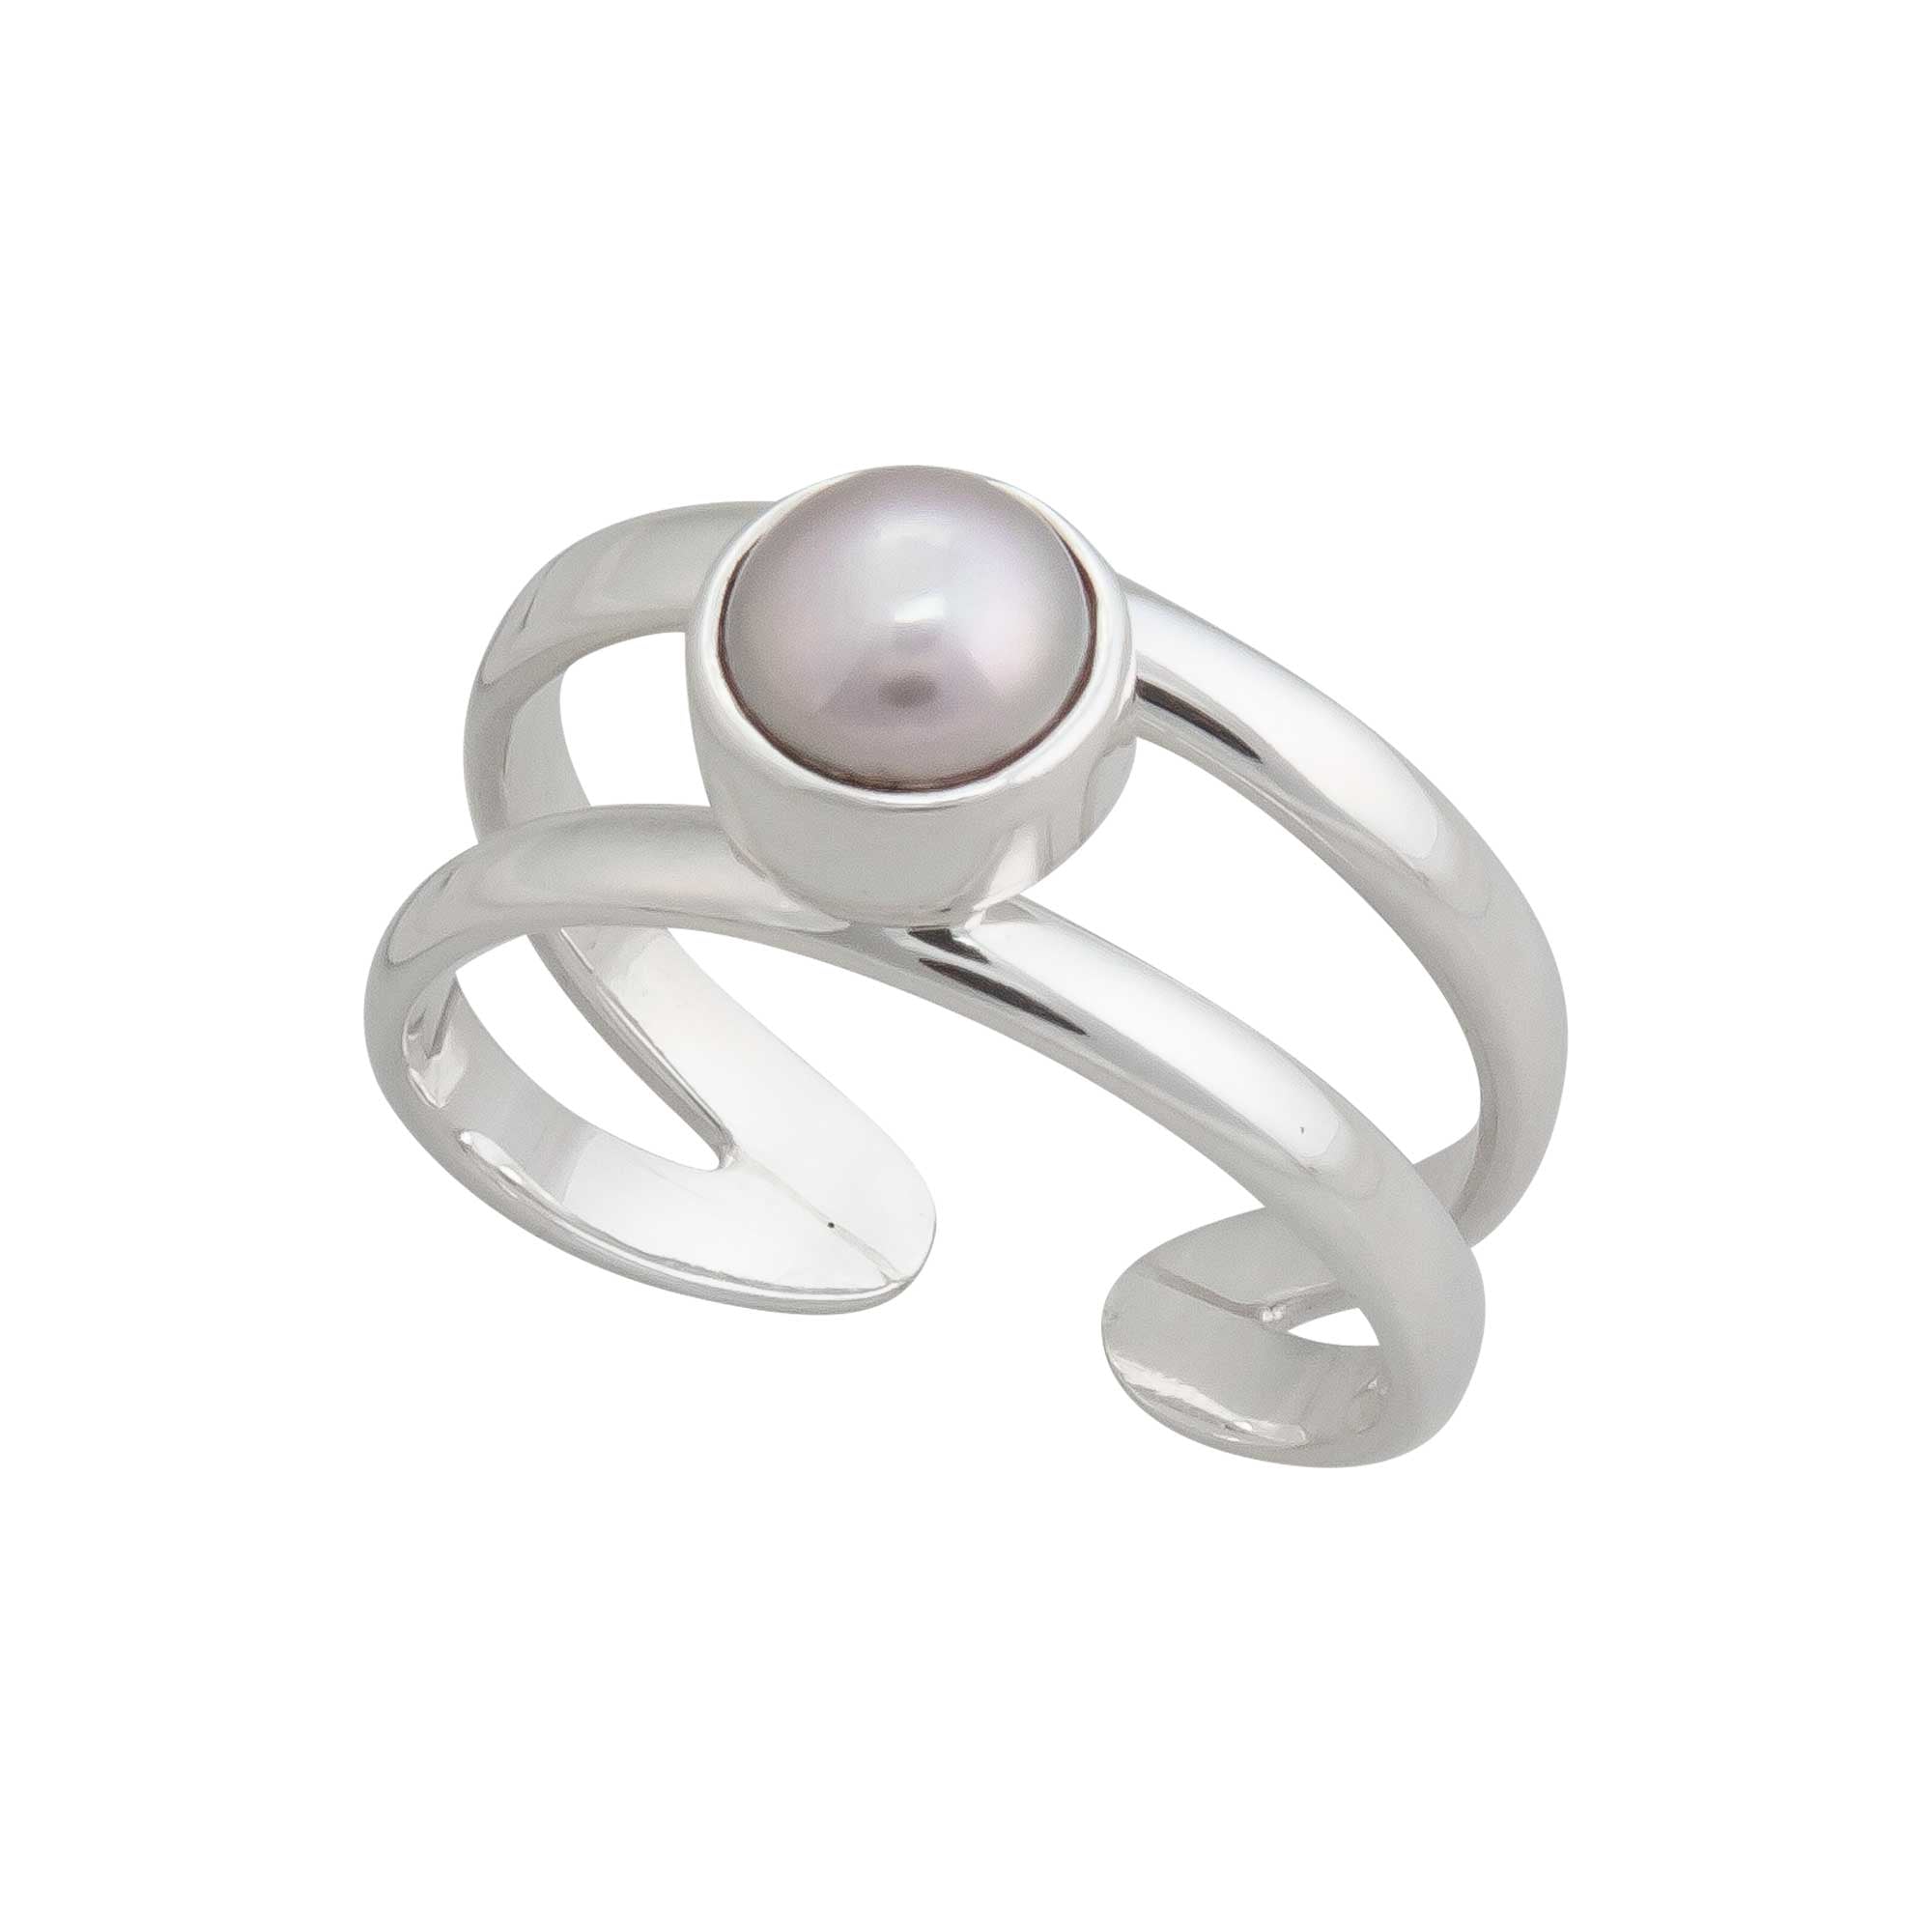 Buy Natural Pearl Ring for Woman, Freshwater Swirl Wave Pearl With Sterling  Silver, Dainty Ring for Mother, Wife, Girlfriend or Daughter Online in  India - Etsy